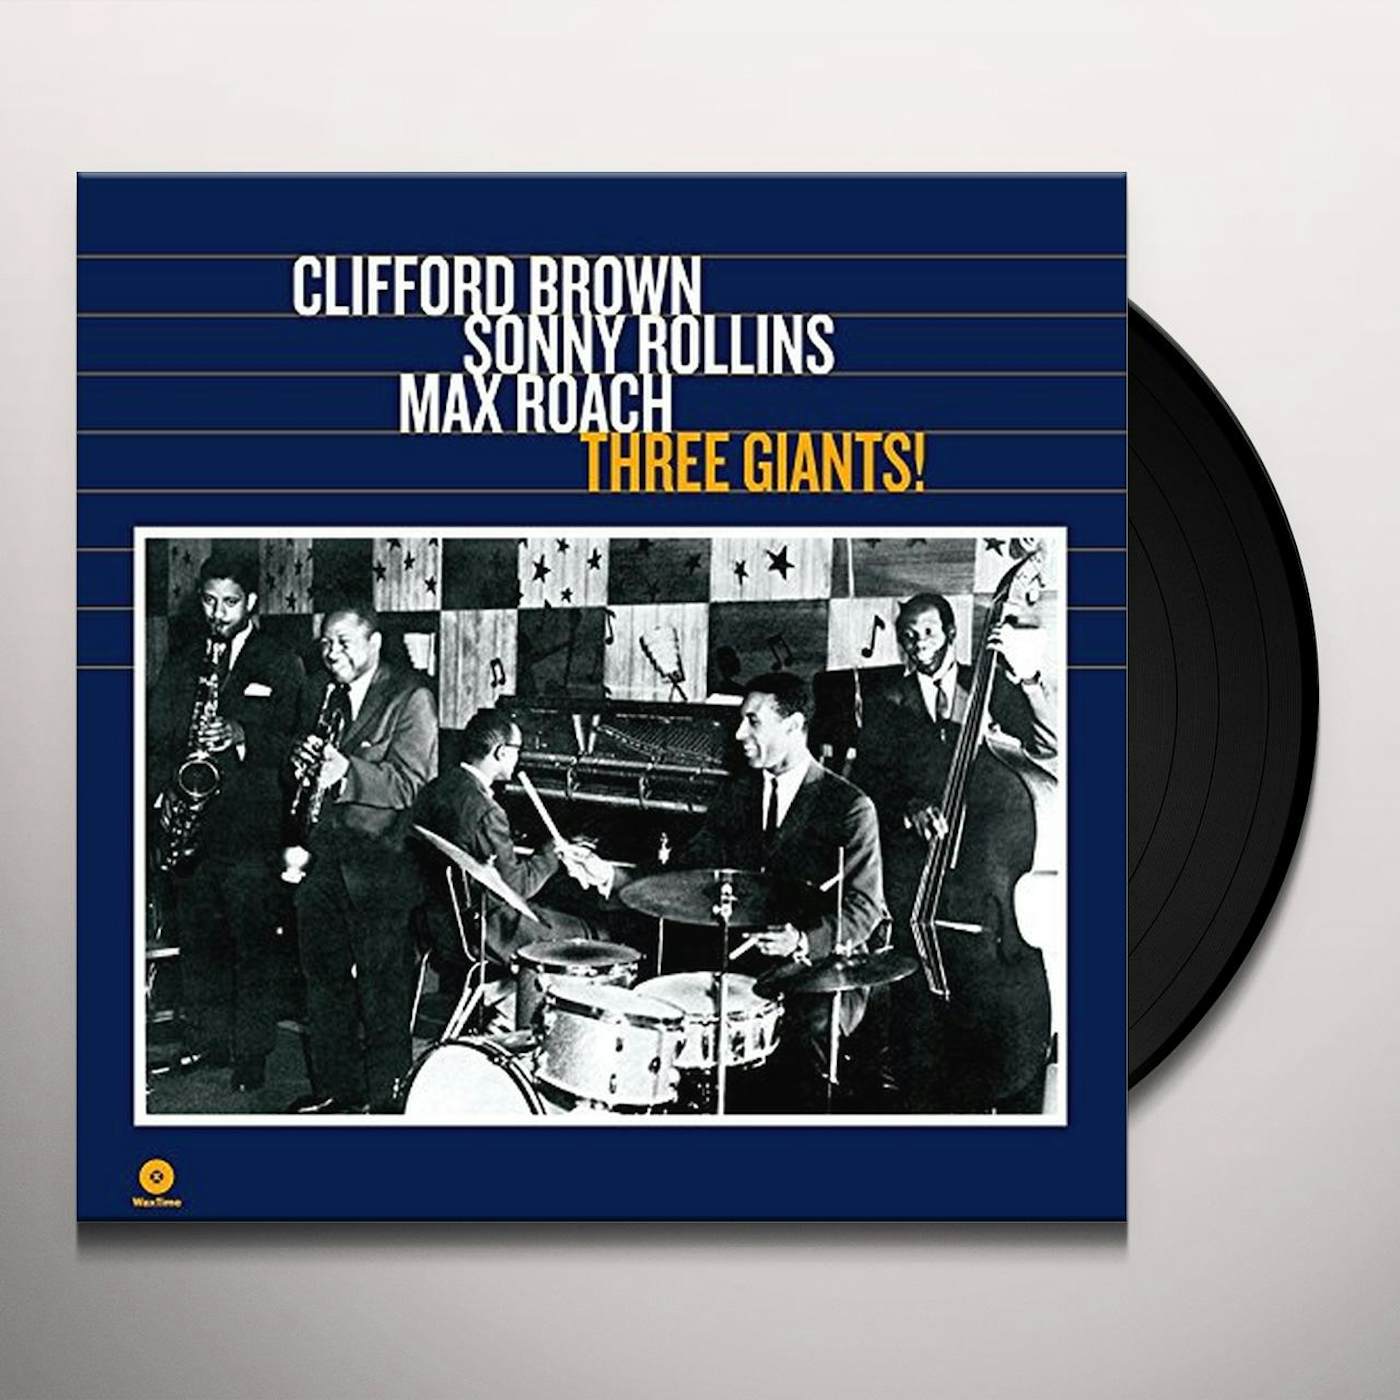 Clifford Brown / Sonny Rollins / Max Roach THREE GIANTS! Vinyl Record - 180 Gram Pressing, Spain Release